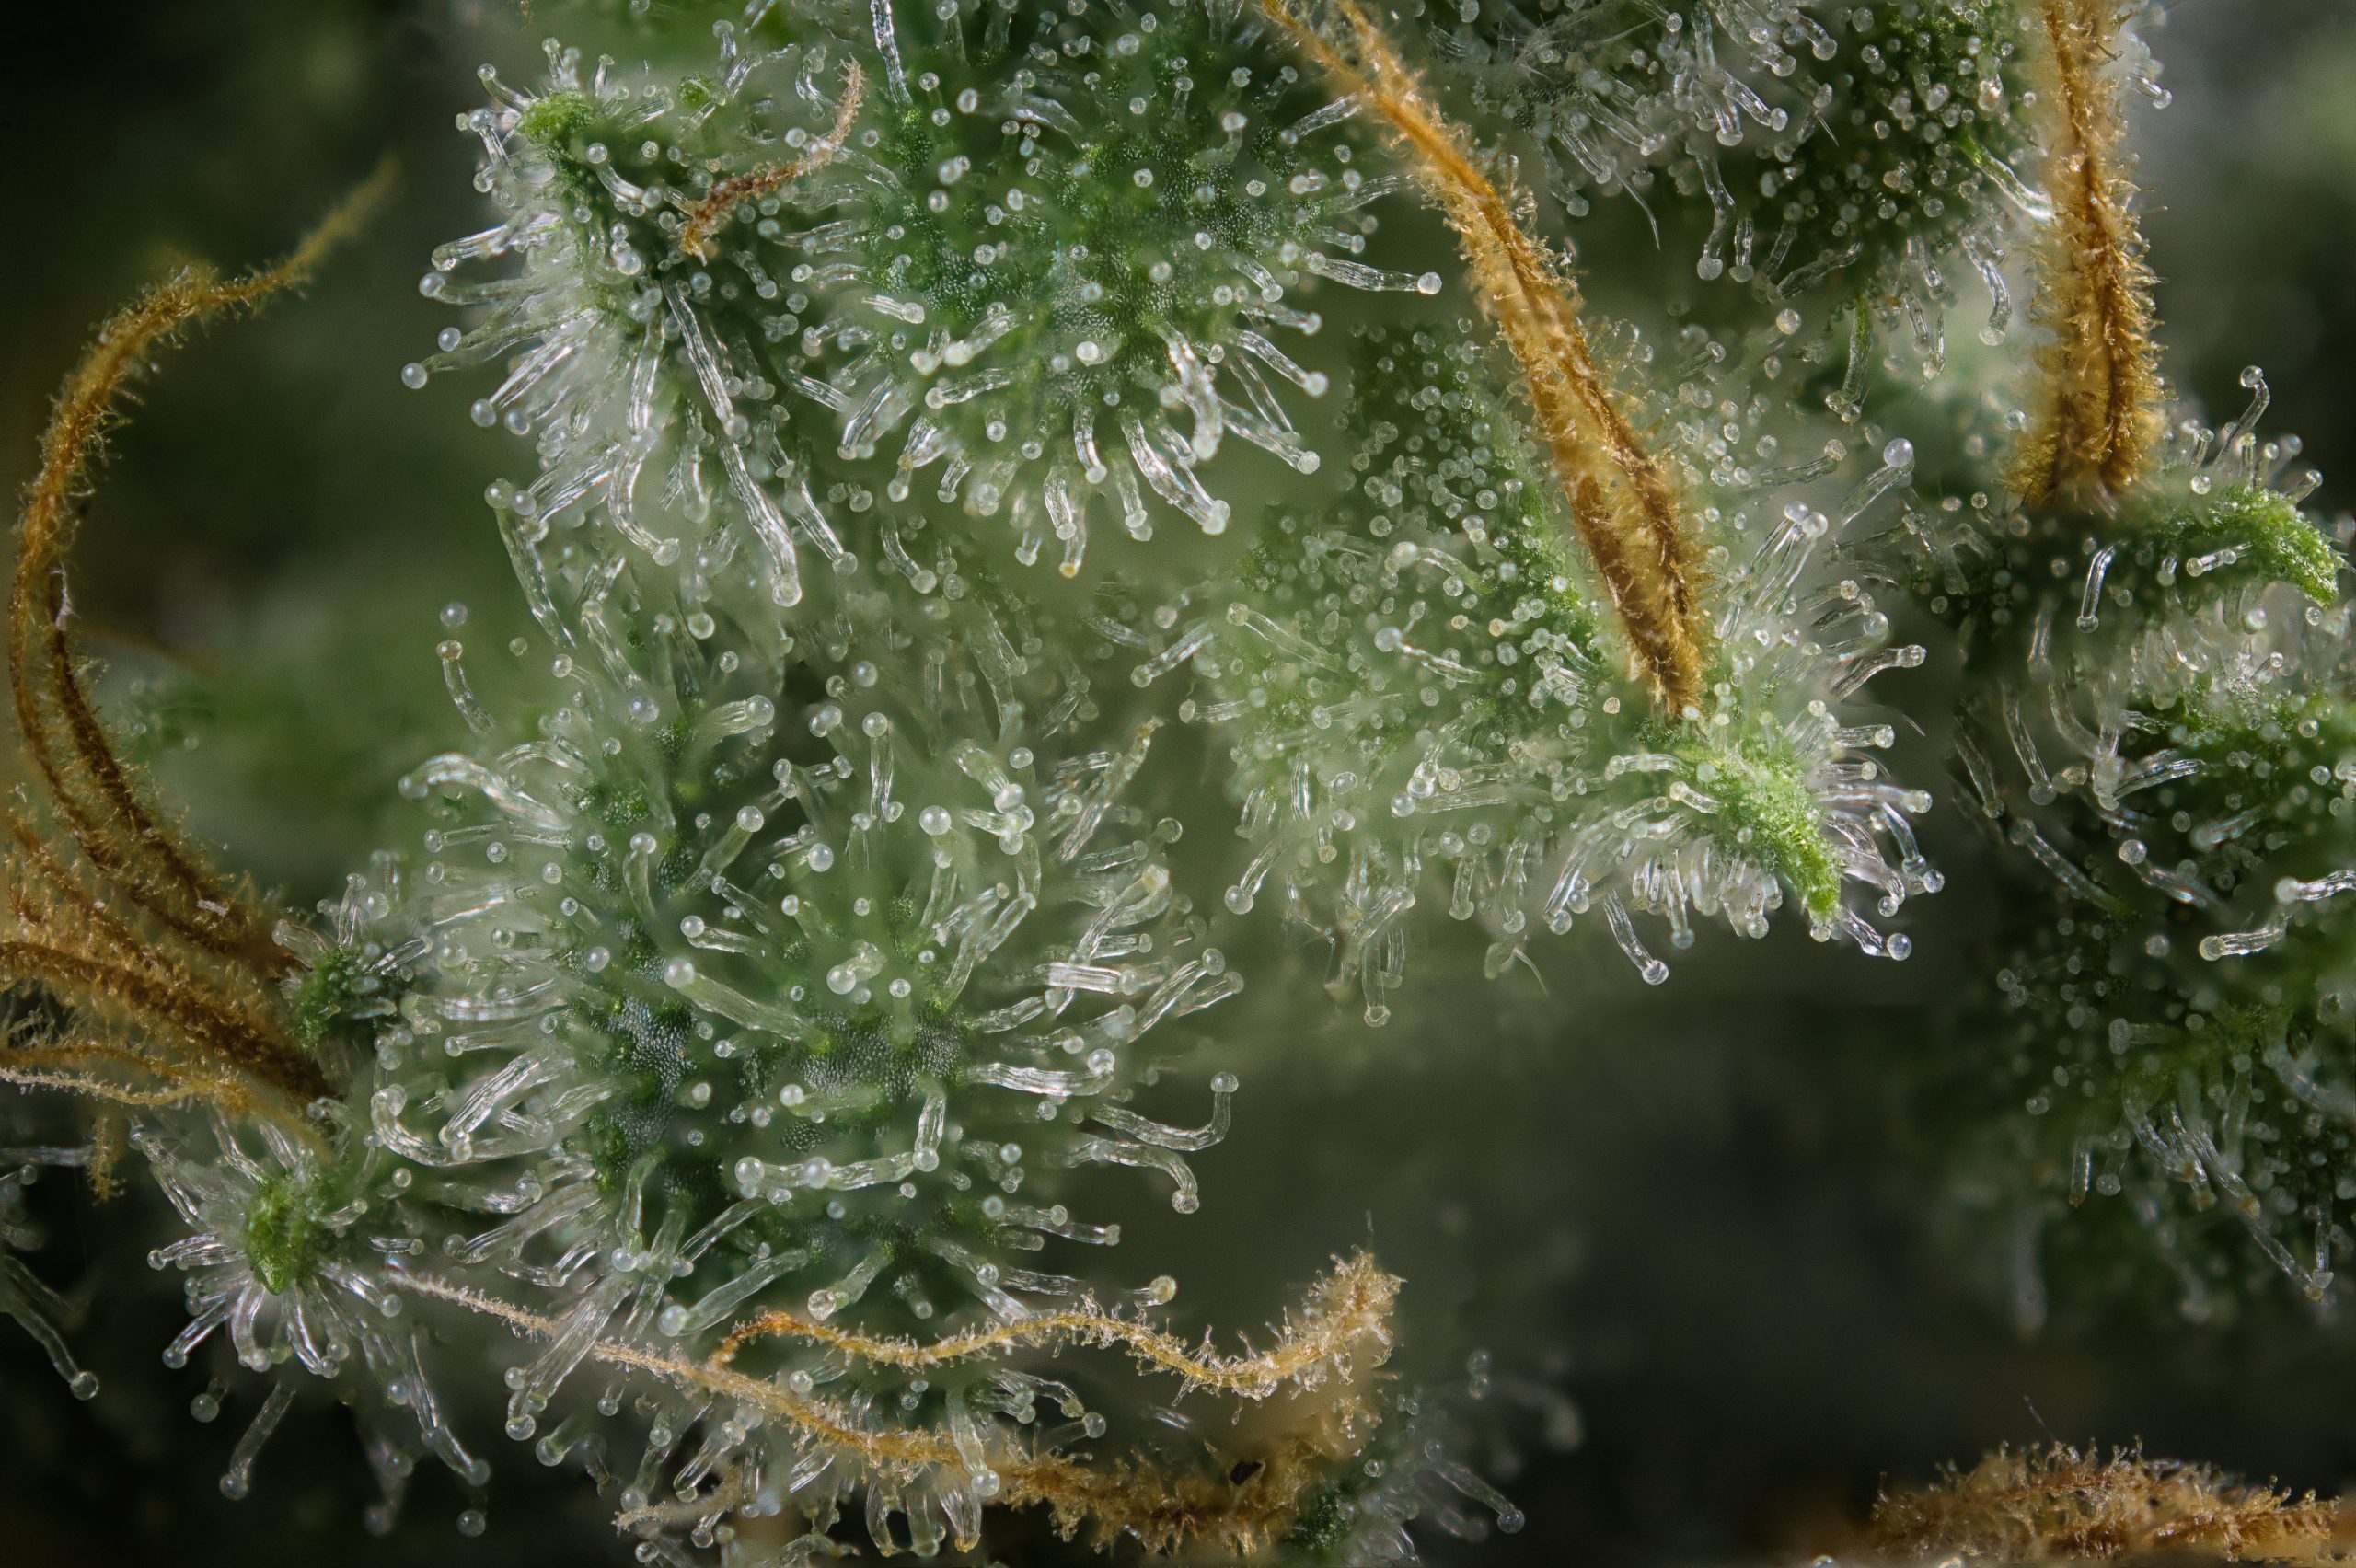 Macro shot of cannabis plant showing trichomes and hairs. 